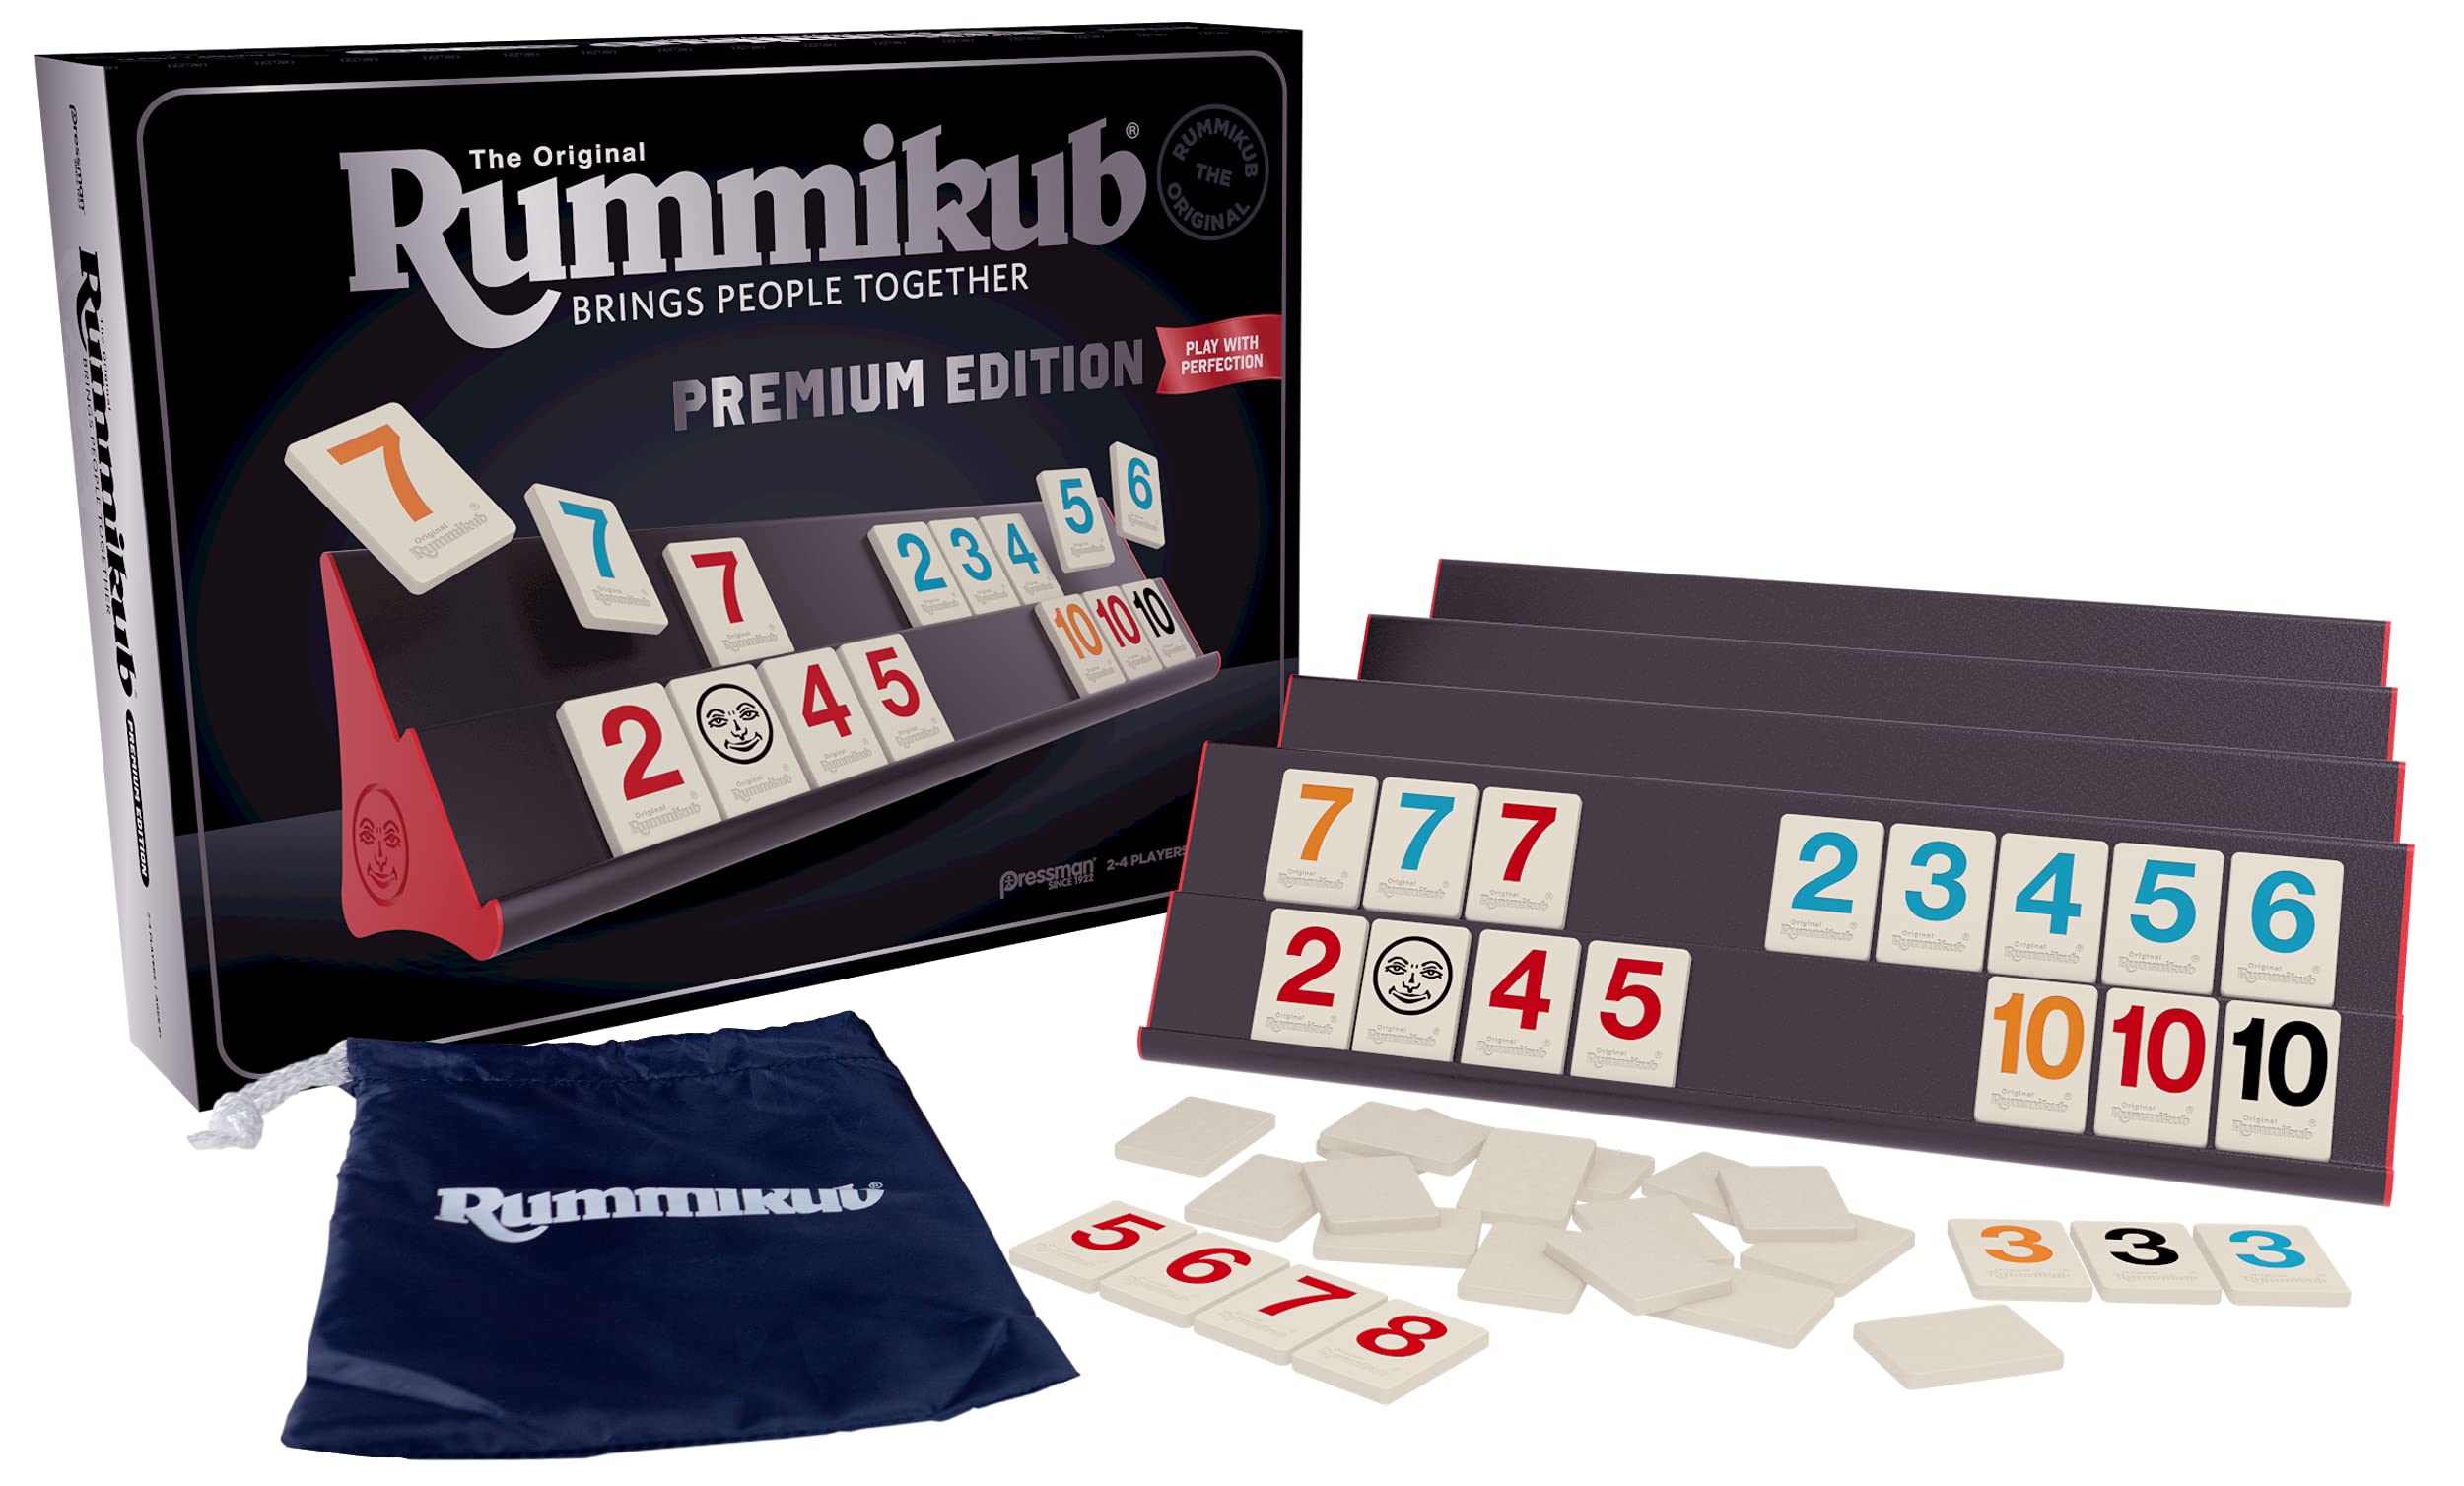 Rummikub Premium Edition by Pressman - Features Racks - Large Number Engraved Tiles and a Storage Bag for The Ultimate Rummikub Experience by Pressman , Silver